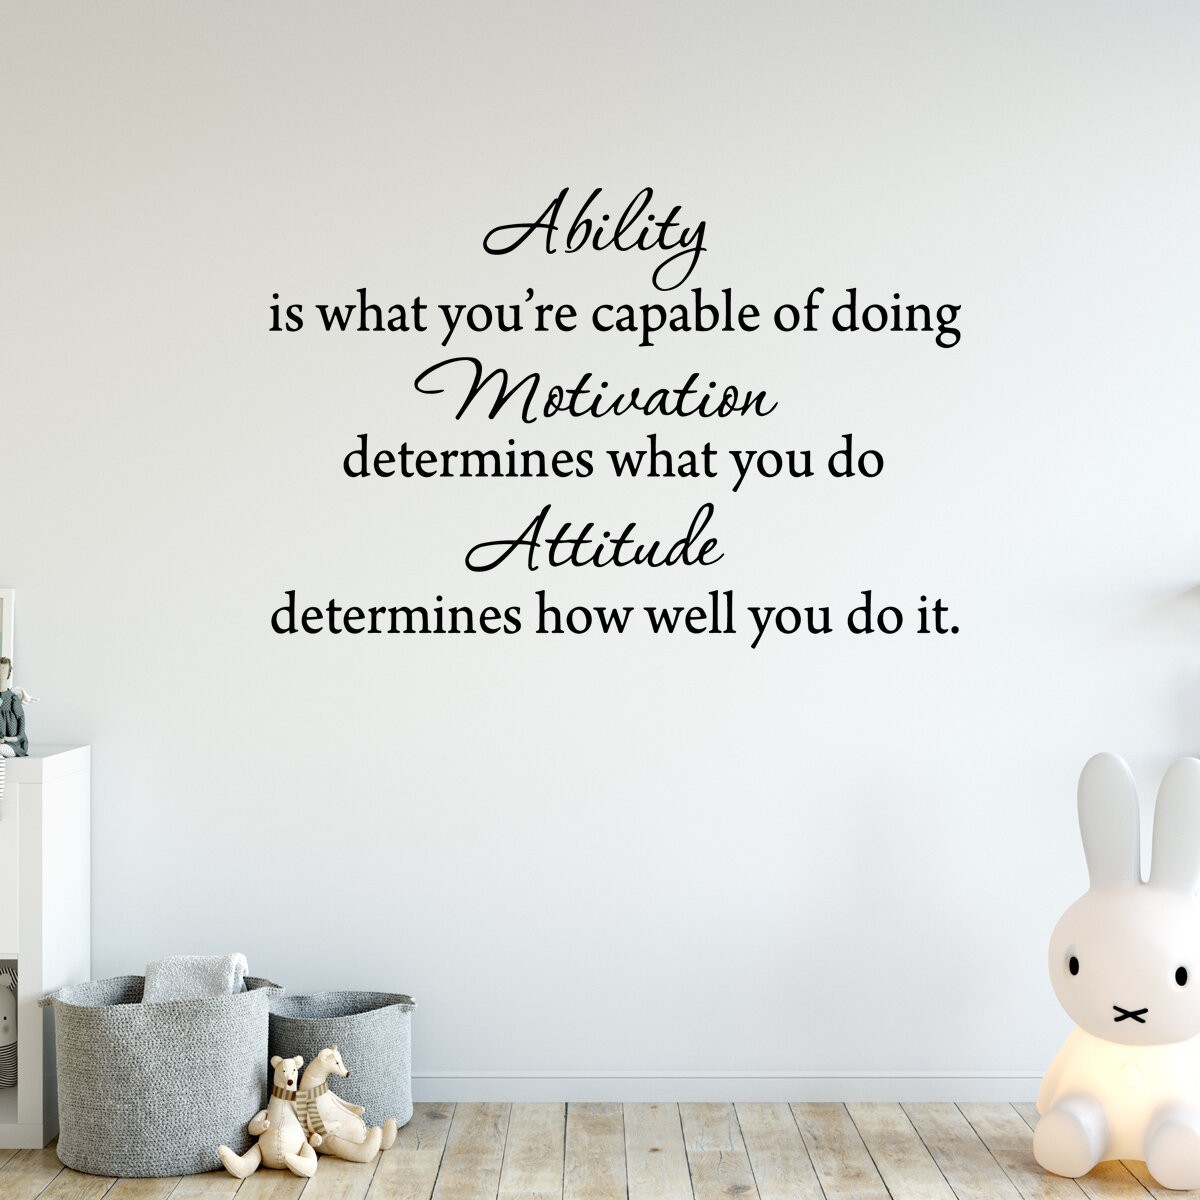 Ability is What You're Capable of Doing inspirational Quote Wall Decal